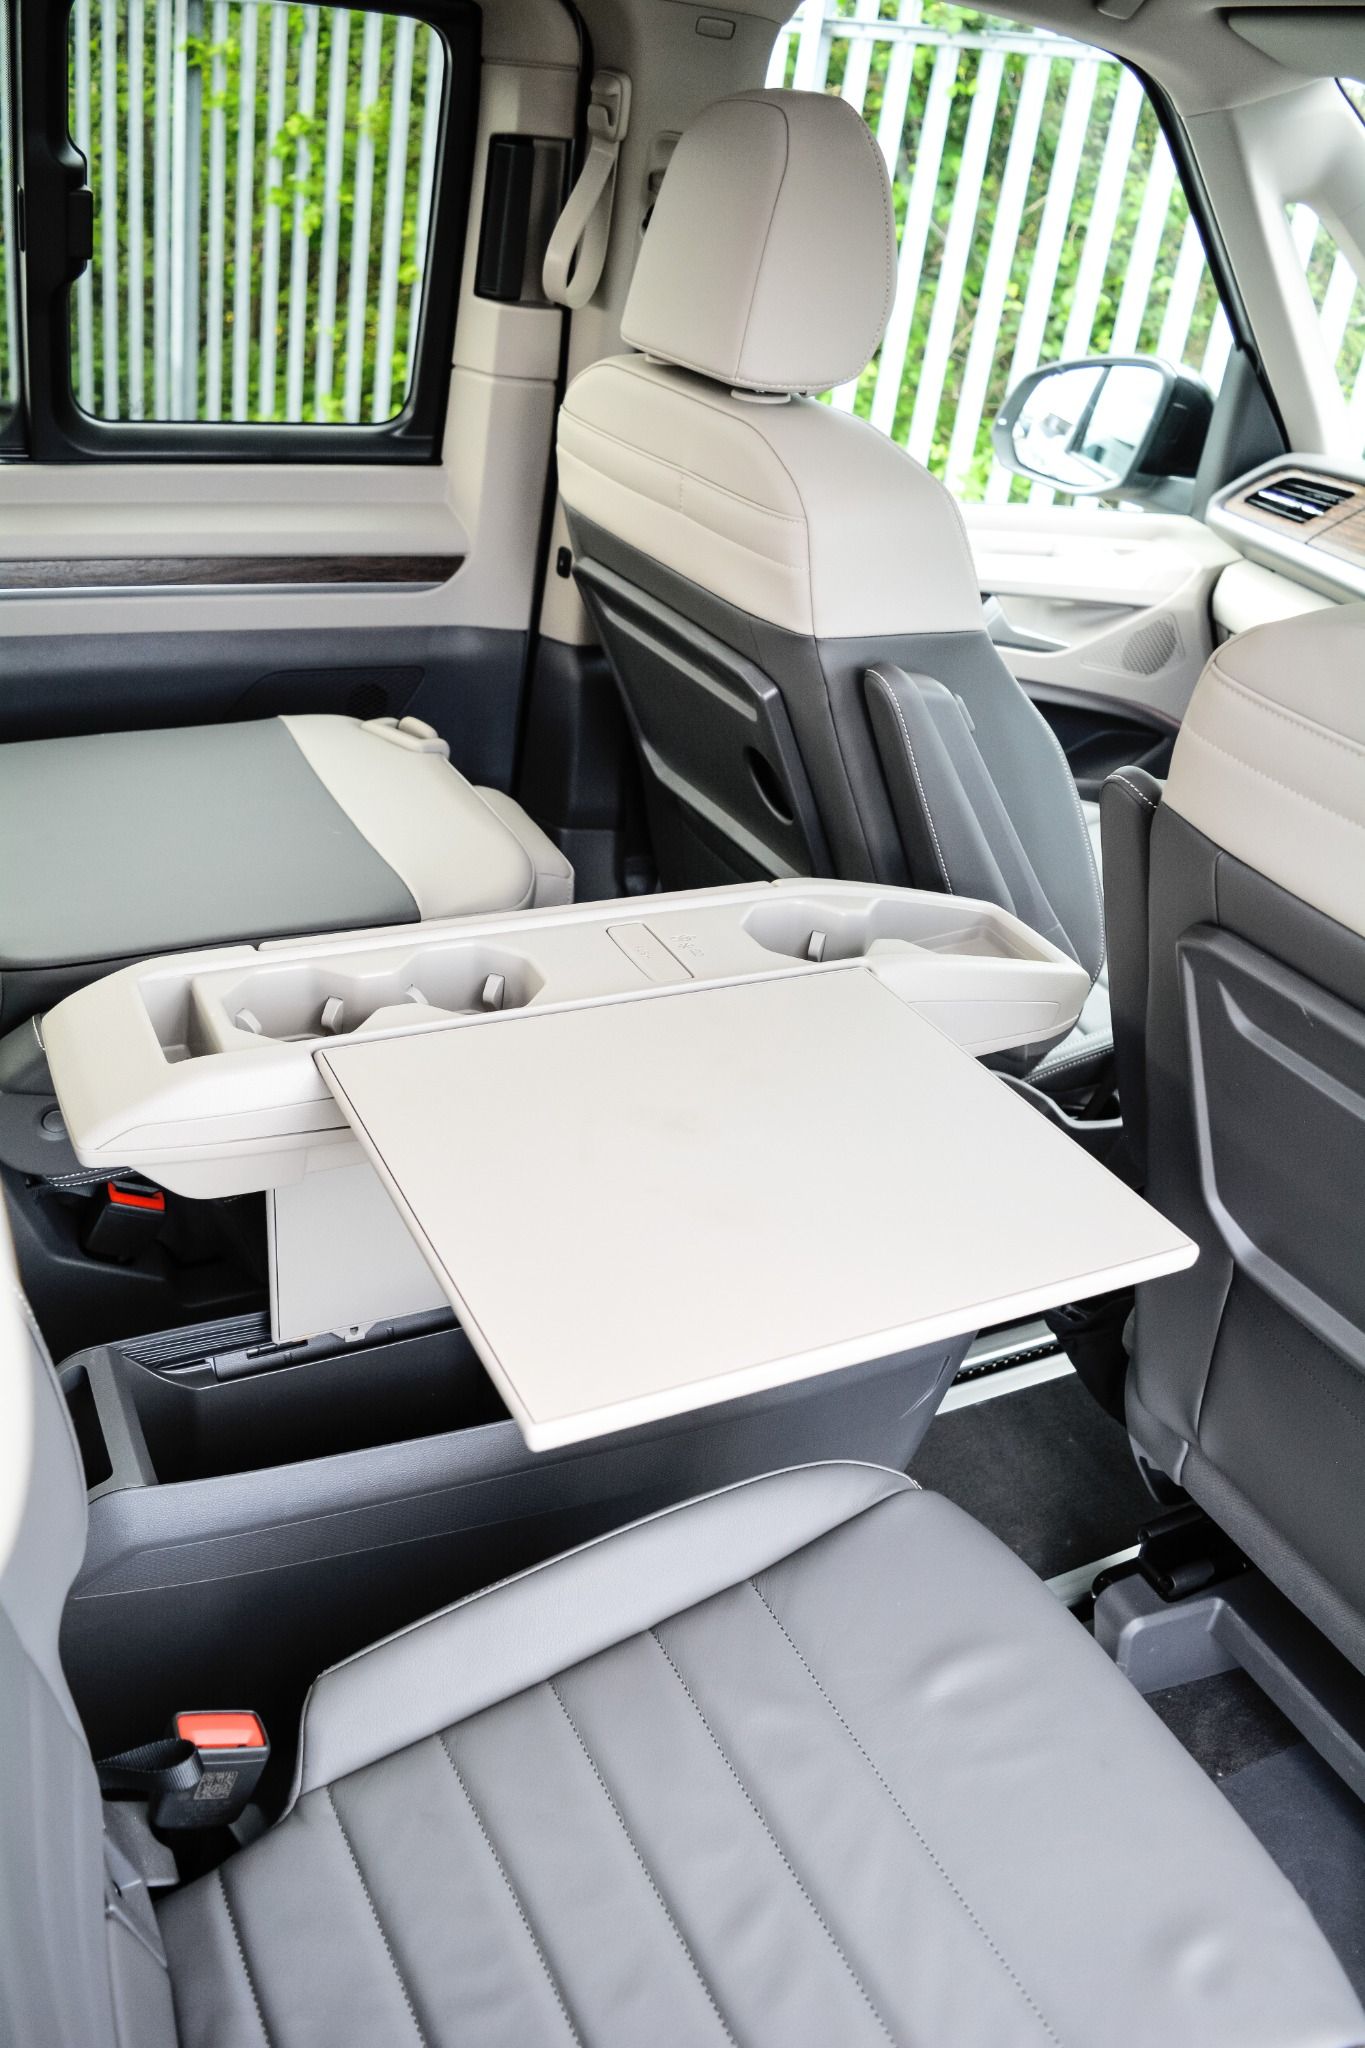 Volkswagen Multivan rear pull out table